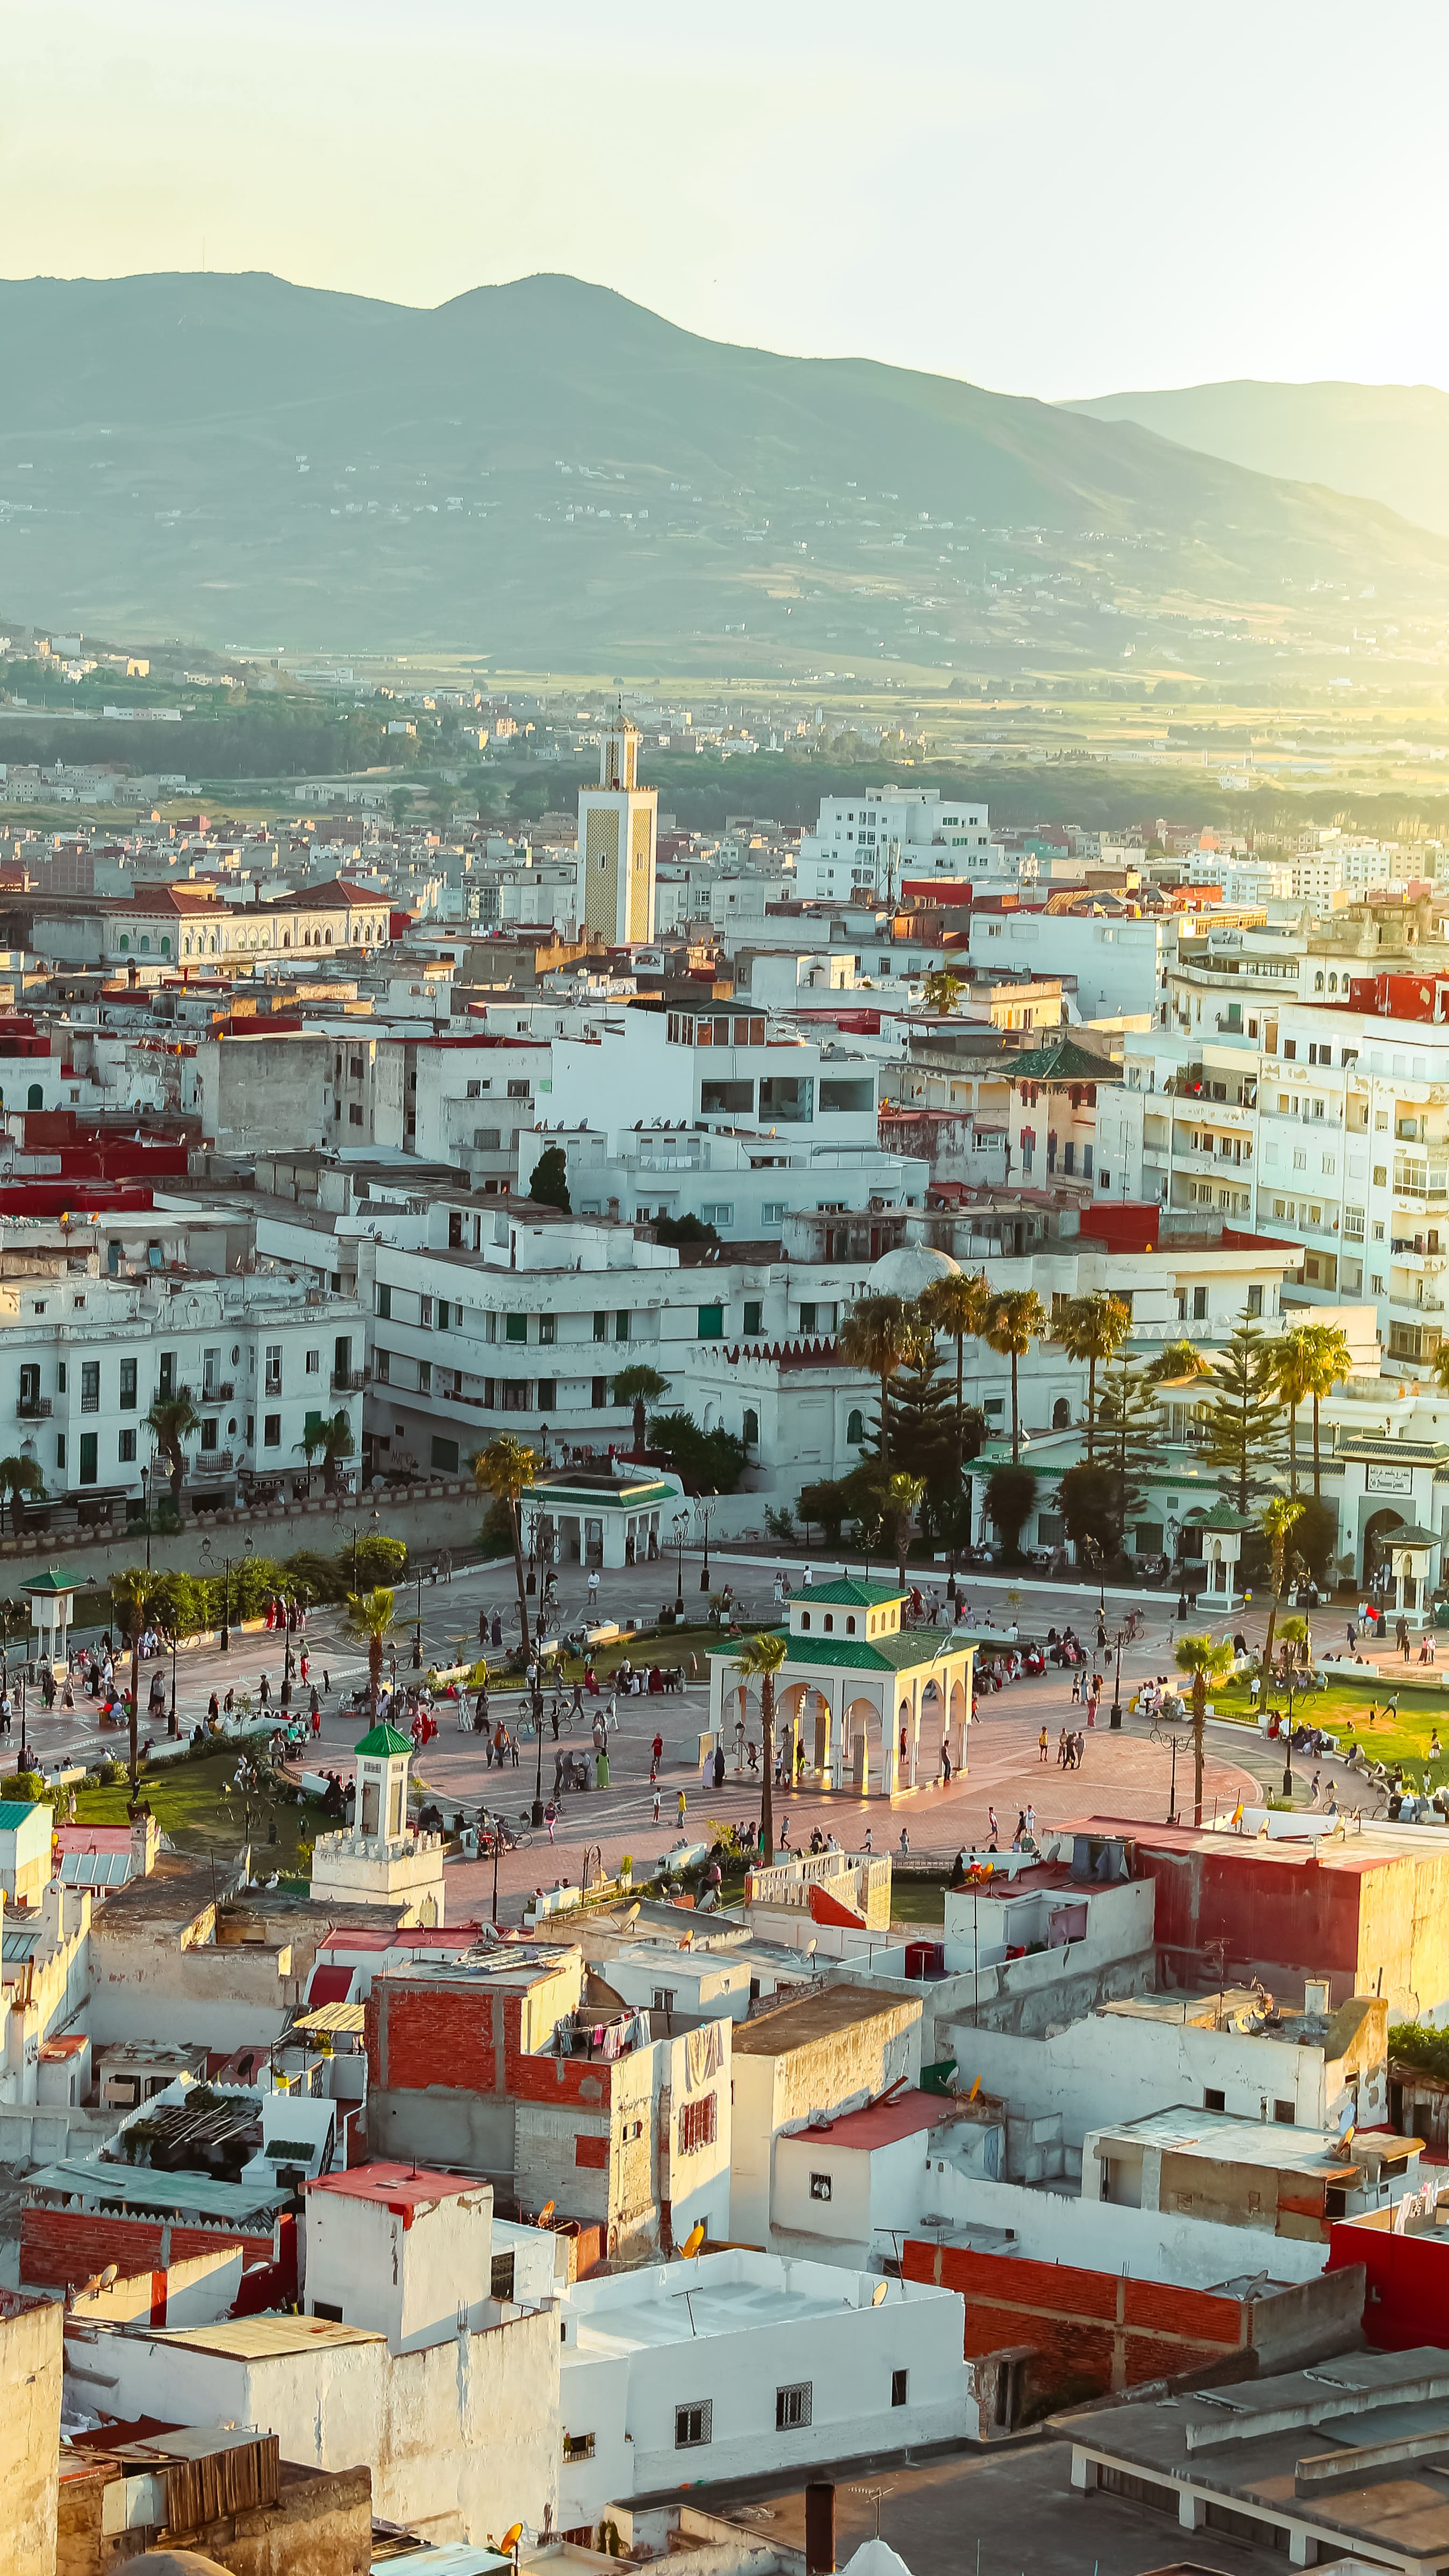 Tetouan: a City Lost in Time